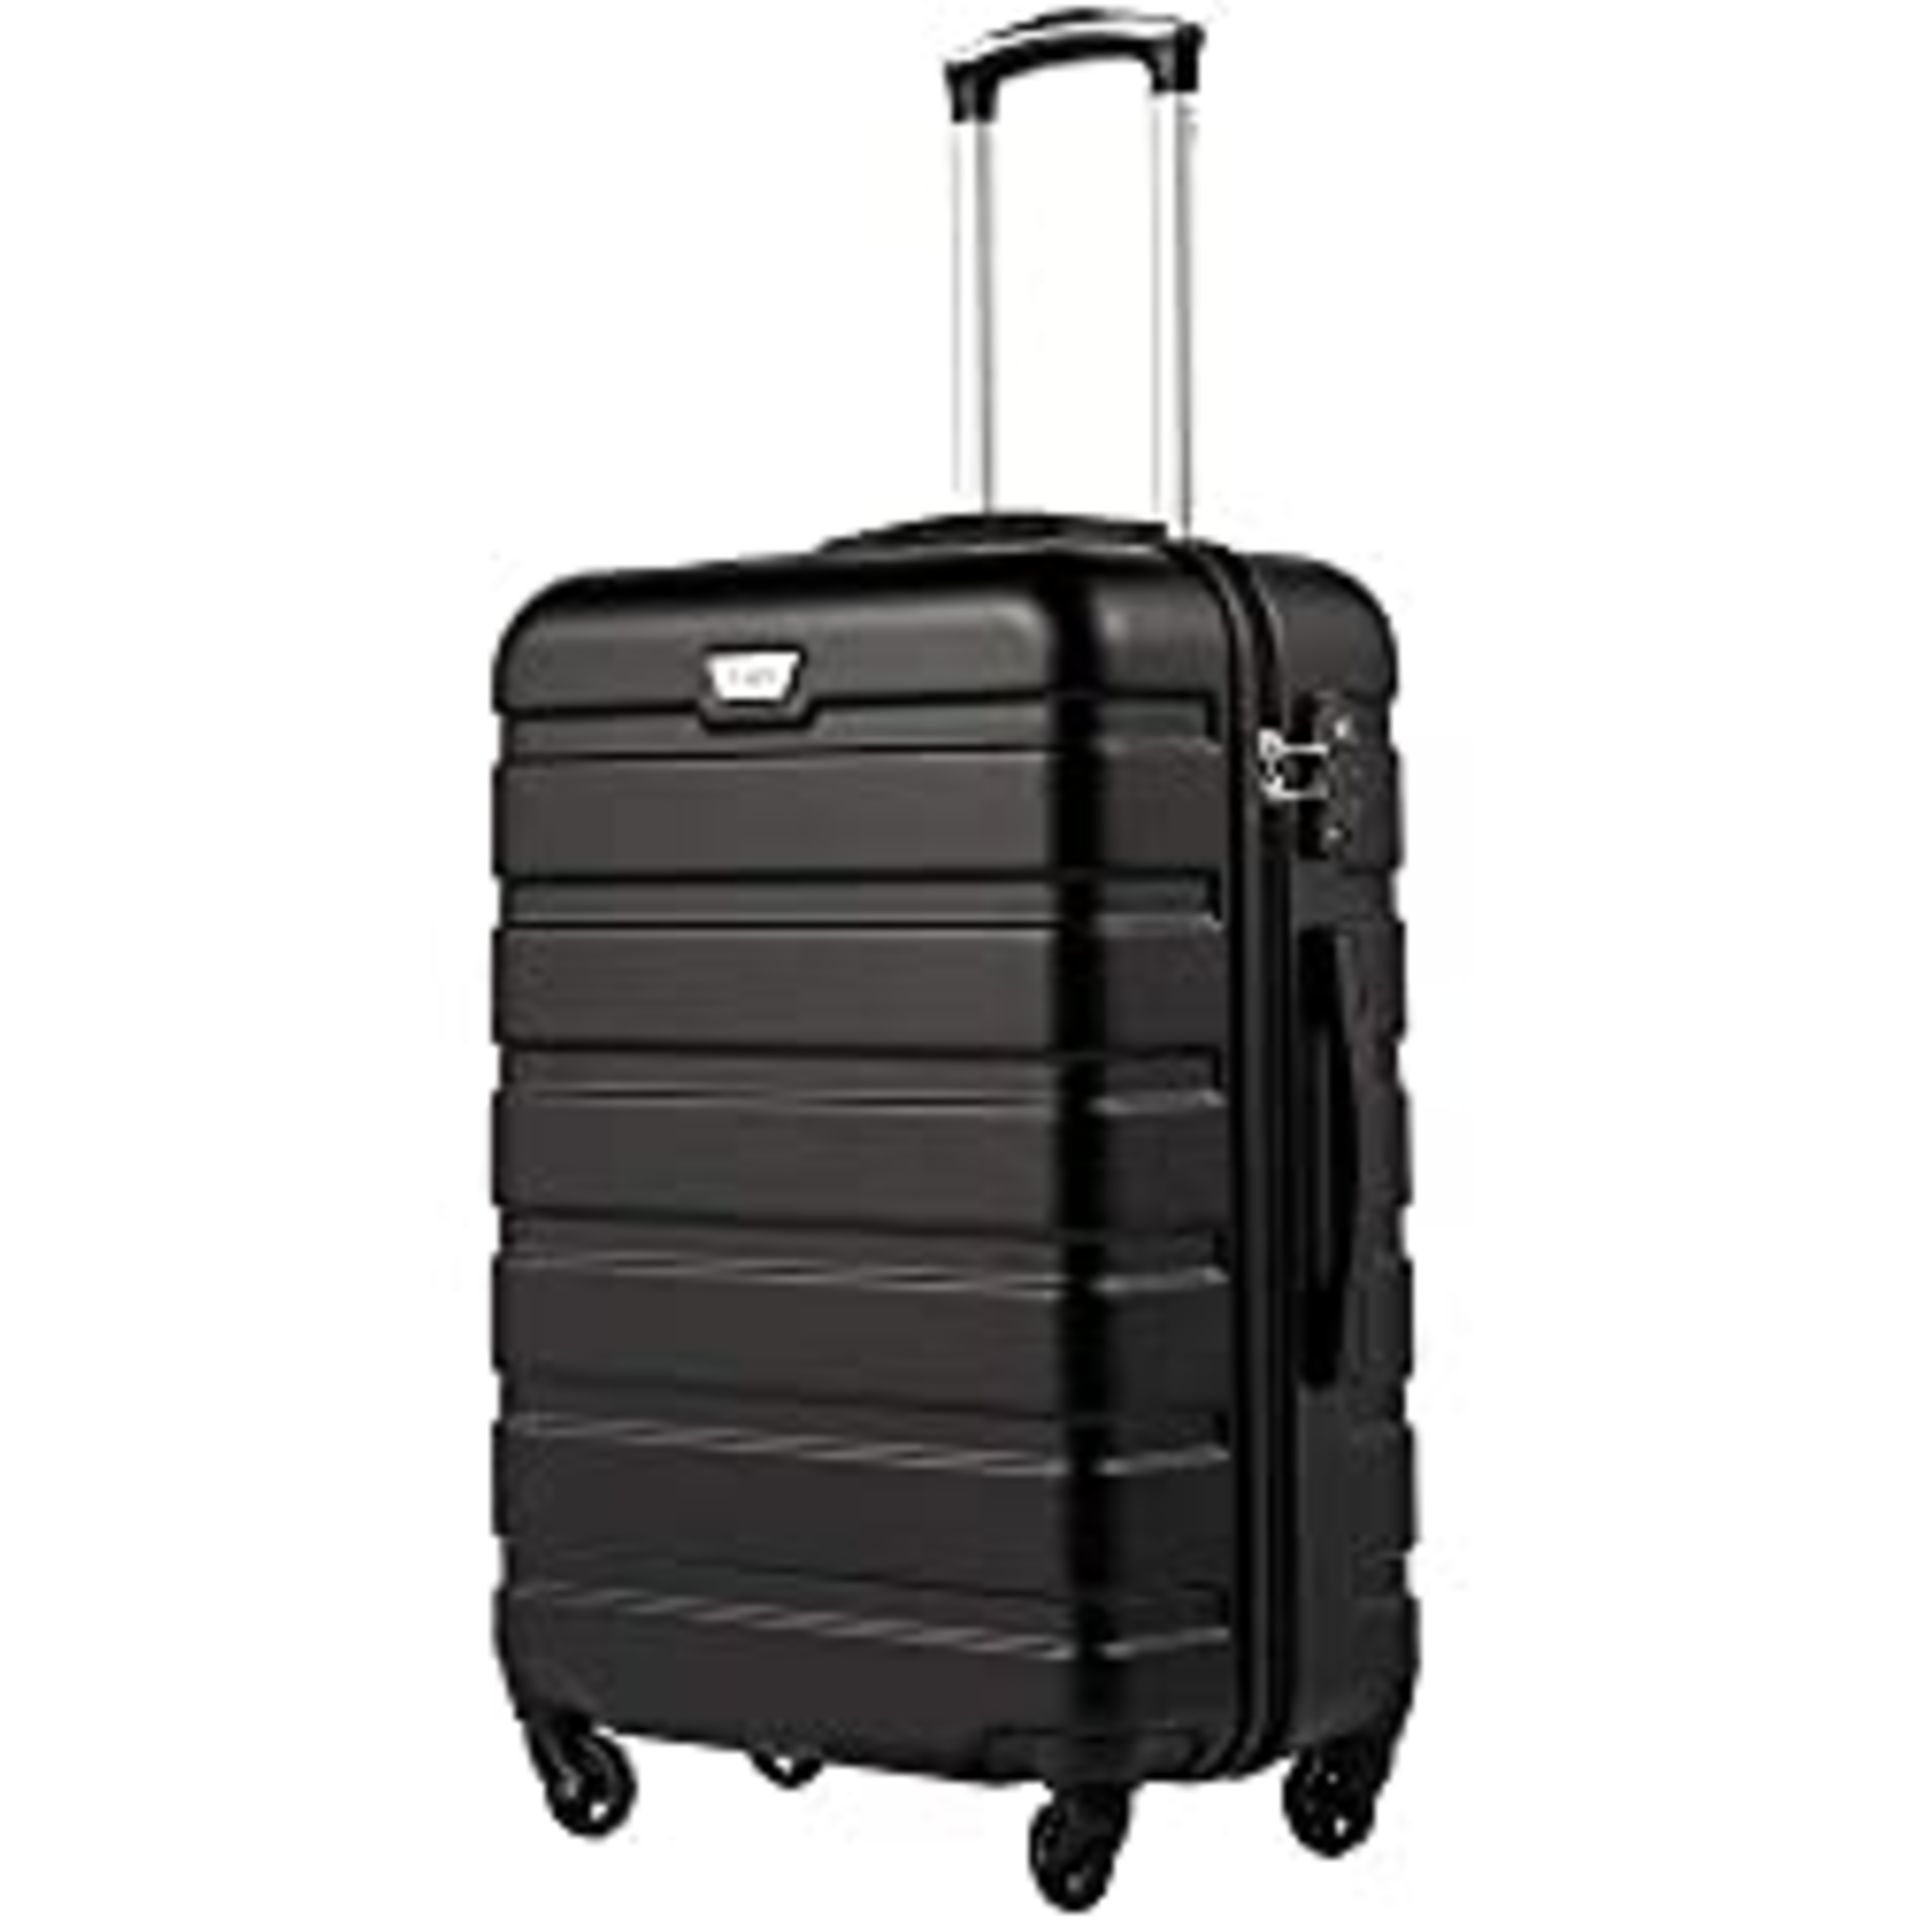 RRP £69.98 COOLIFE Suitcase Trolley Carry On Hand Cabin Luggage